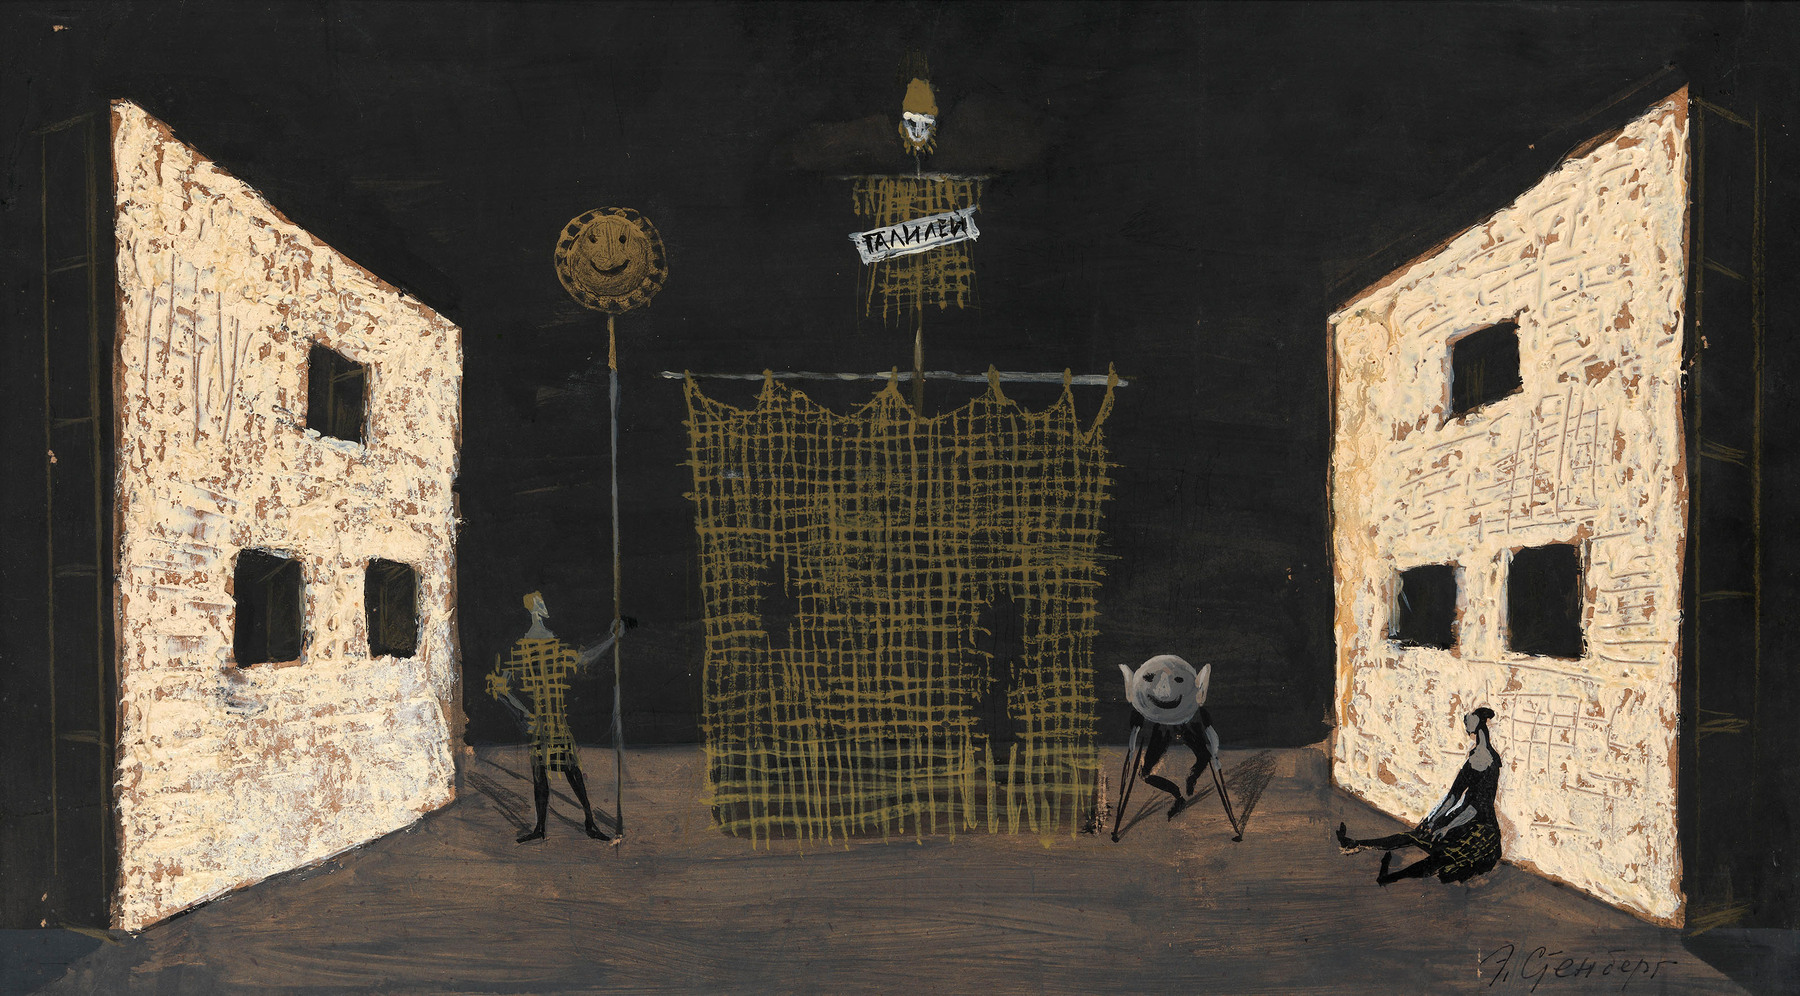 Stage Designs for Brecht's "Life of Galileo", "Listen. Mayakovsky", "Masquerade" and Stage Model for "Masquerade", </i>four works<i>,